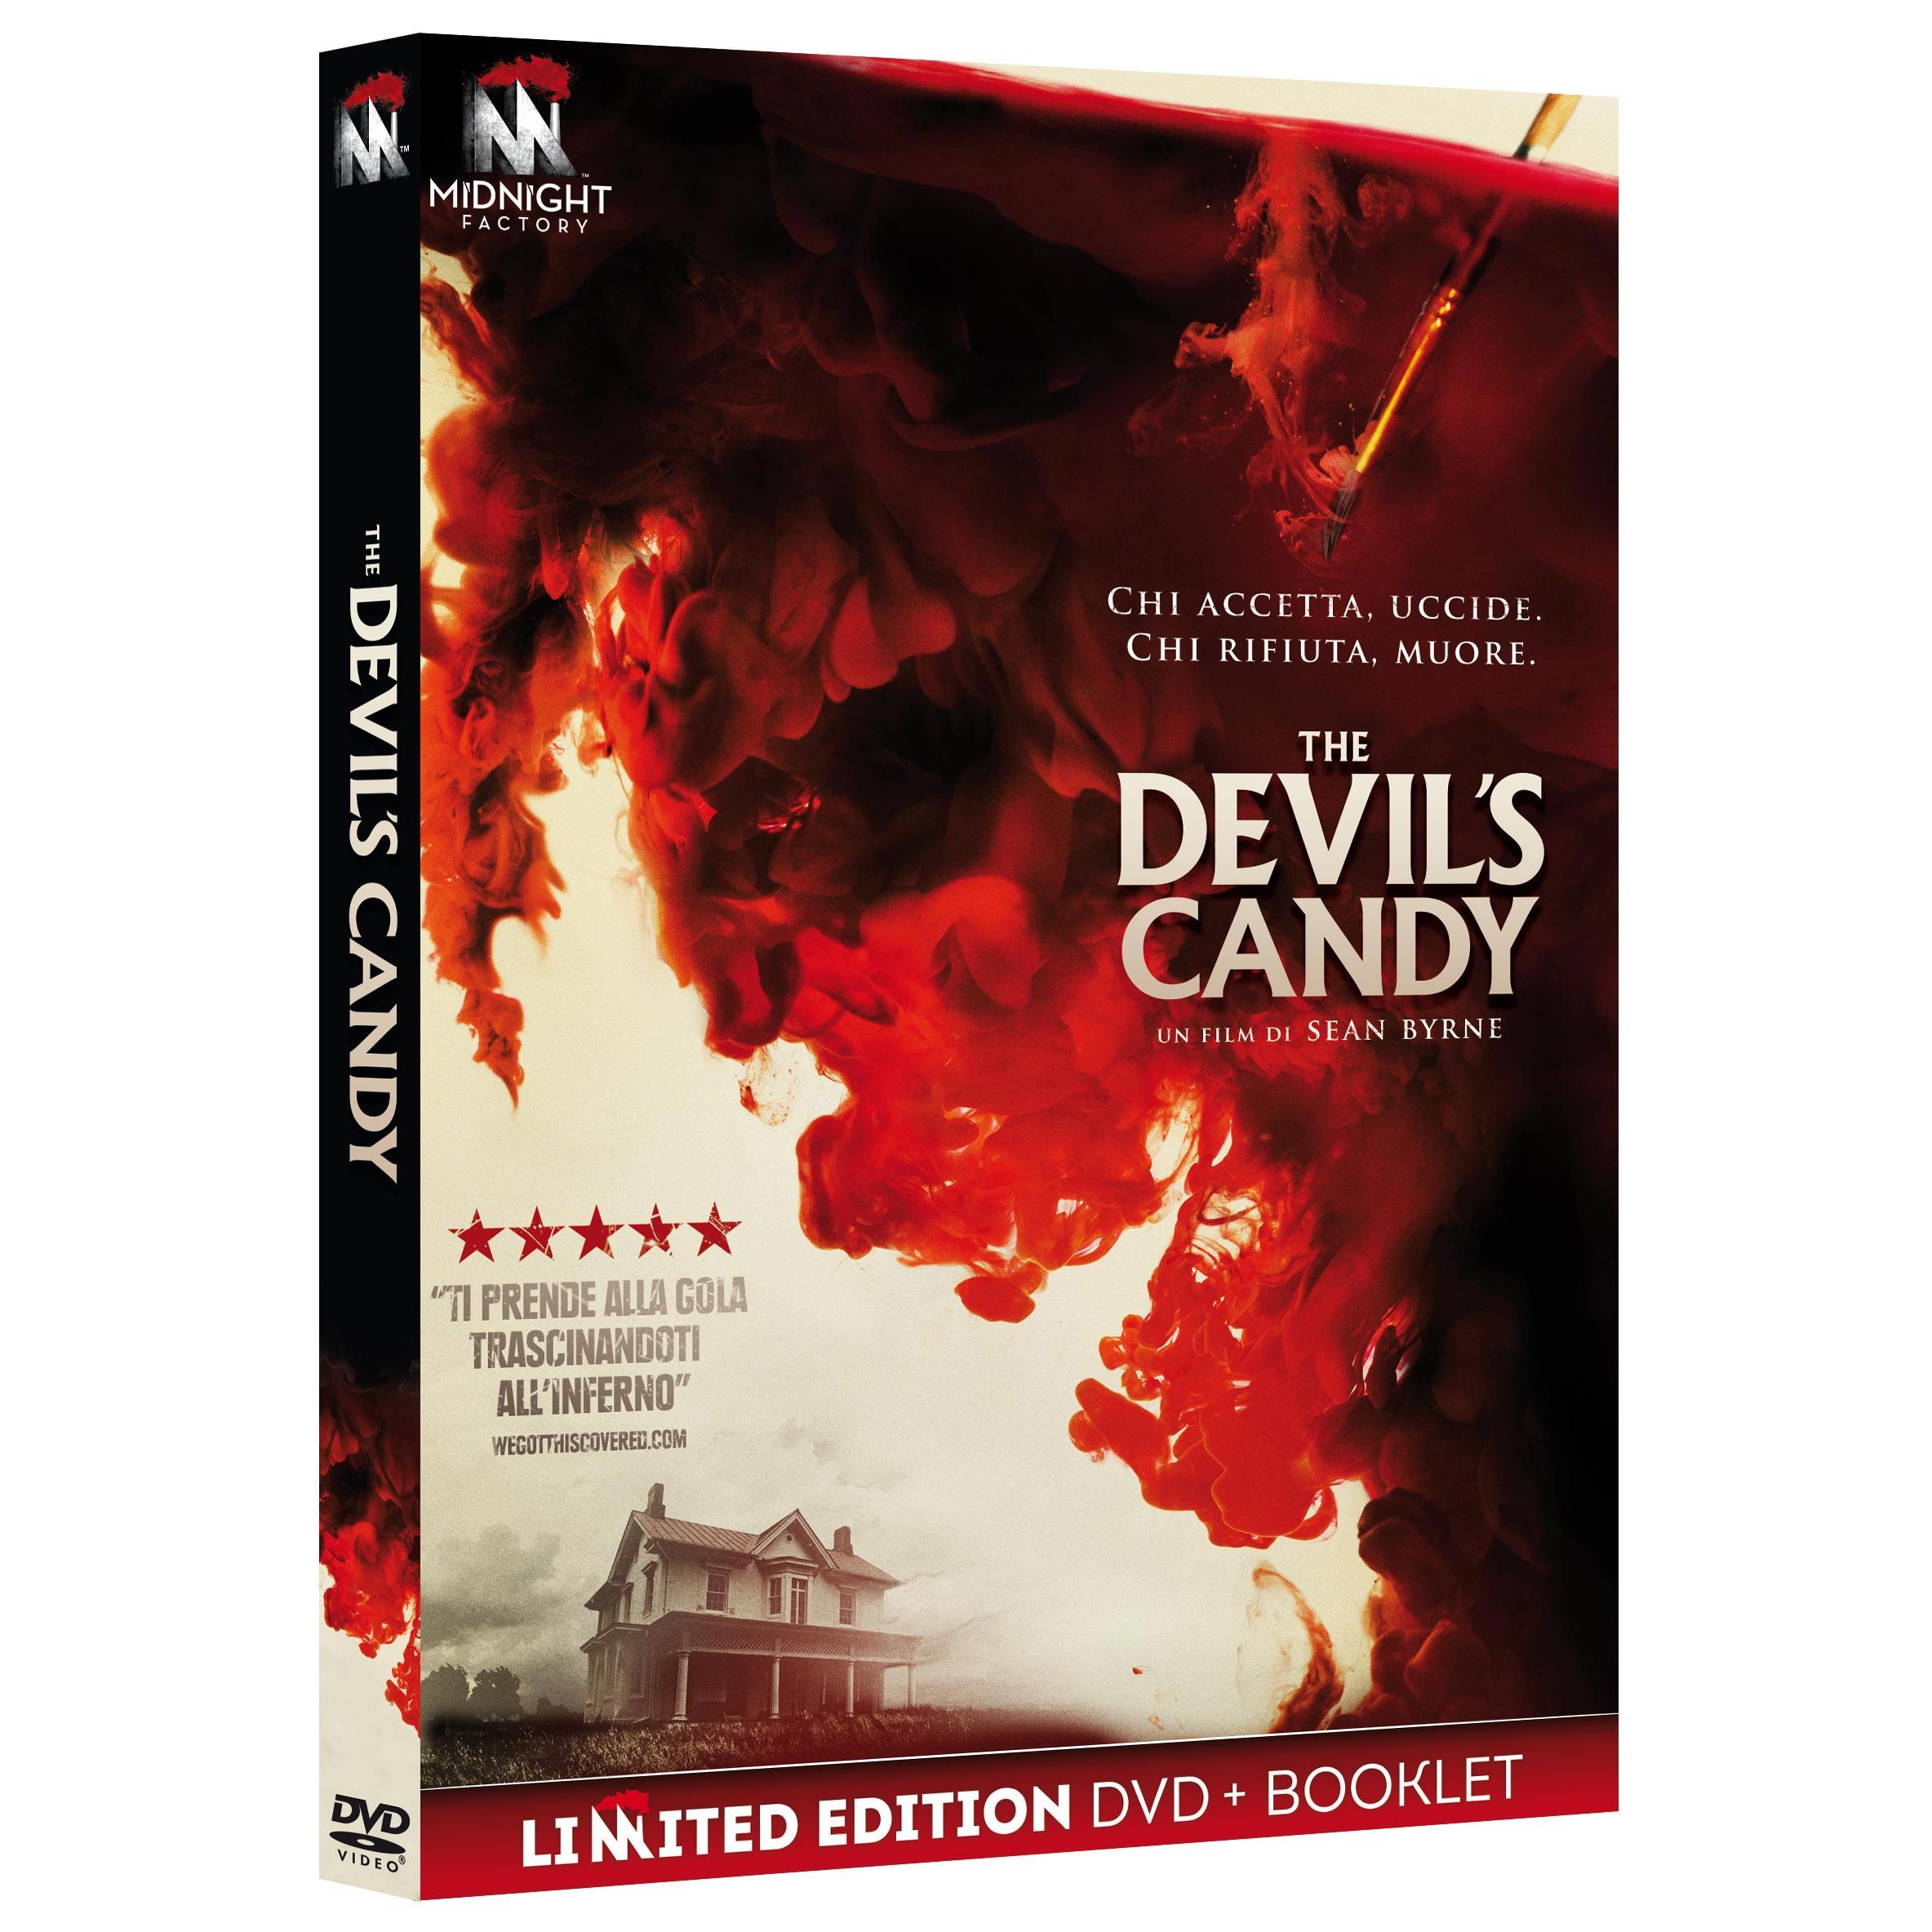 DEVIL'S CANDY (THE) (DVD+BOOKLET)